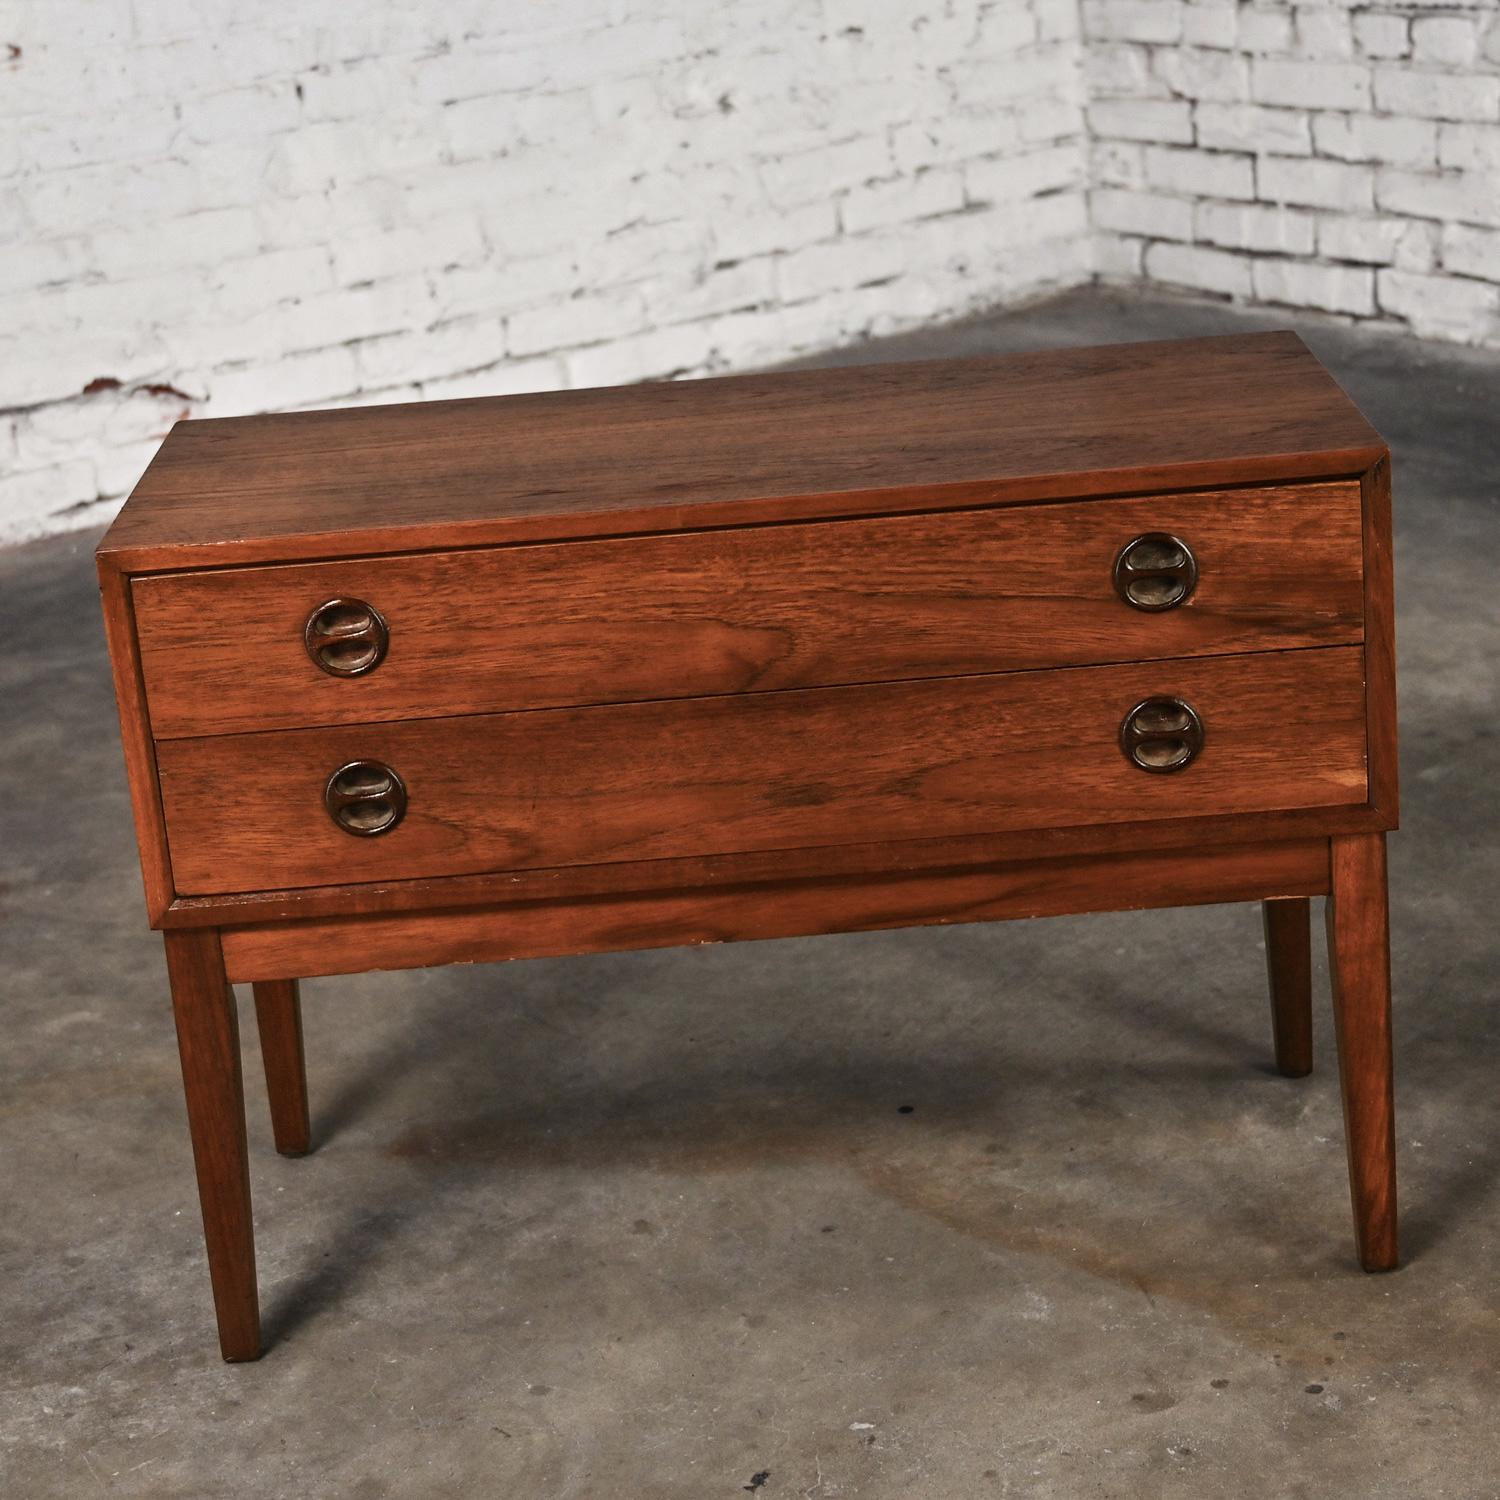 Fabulous 1950-1960’s Scandinavian Modern teak 2 drawer low bench, dresser, cabinet, or credenza attributed to Arne Wahl Iversen for vintage IKEA. This piece has been attributed based upon archived research including online sources, vintage